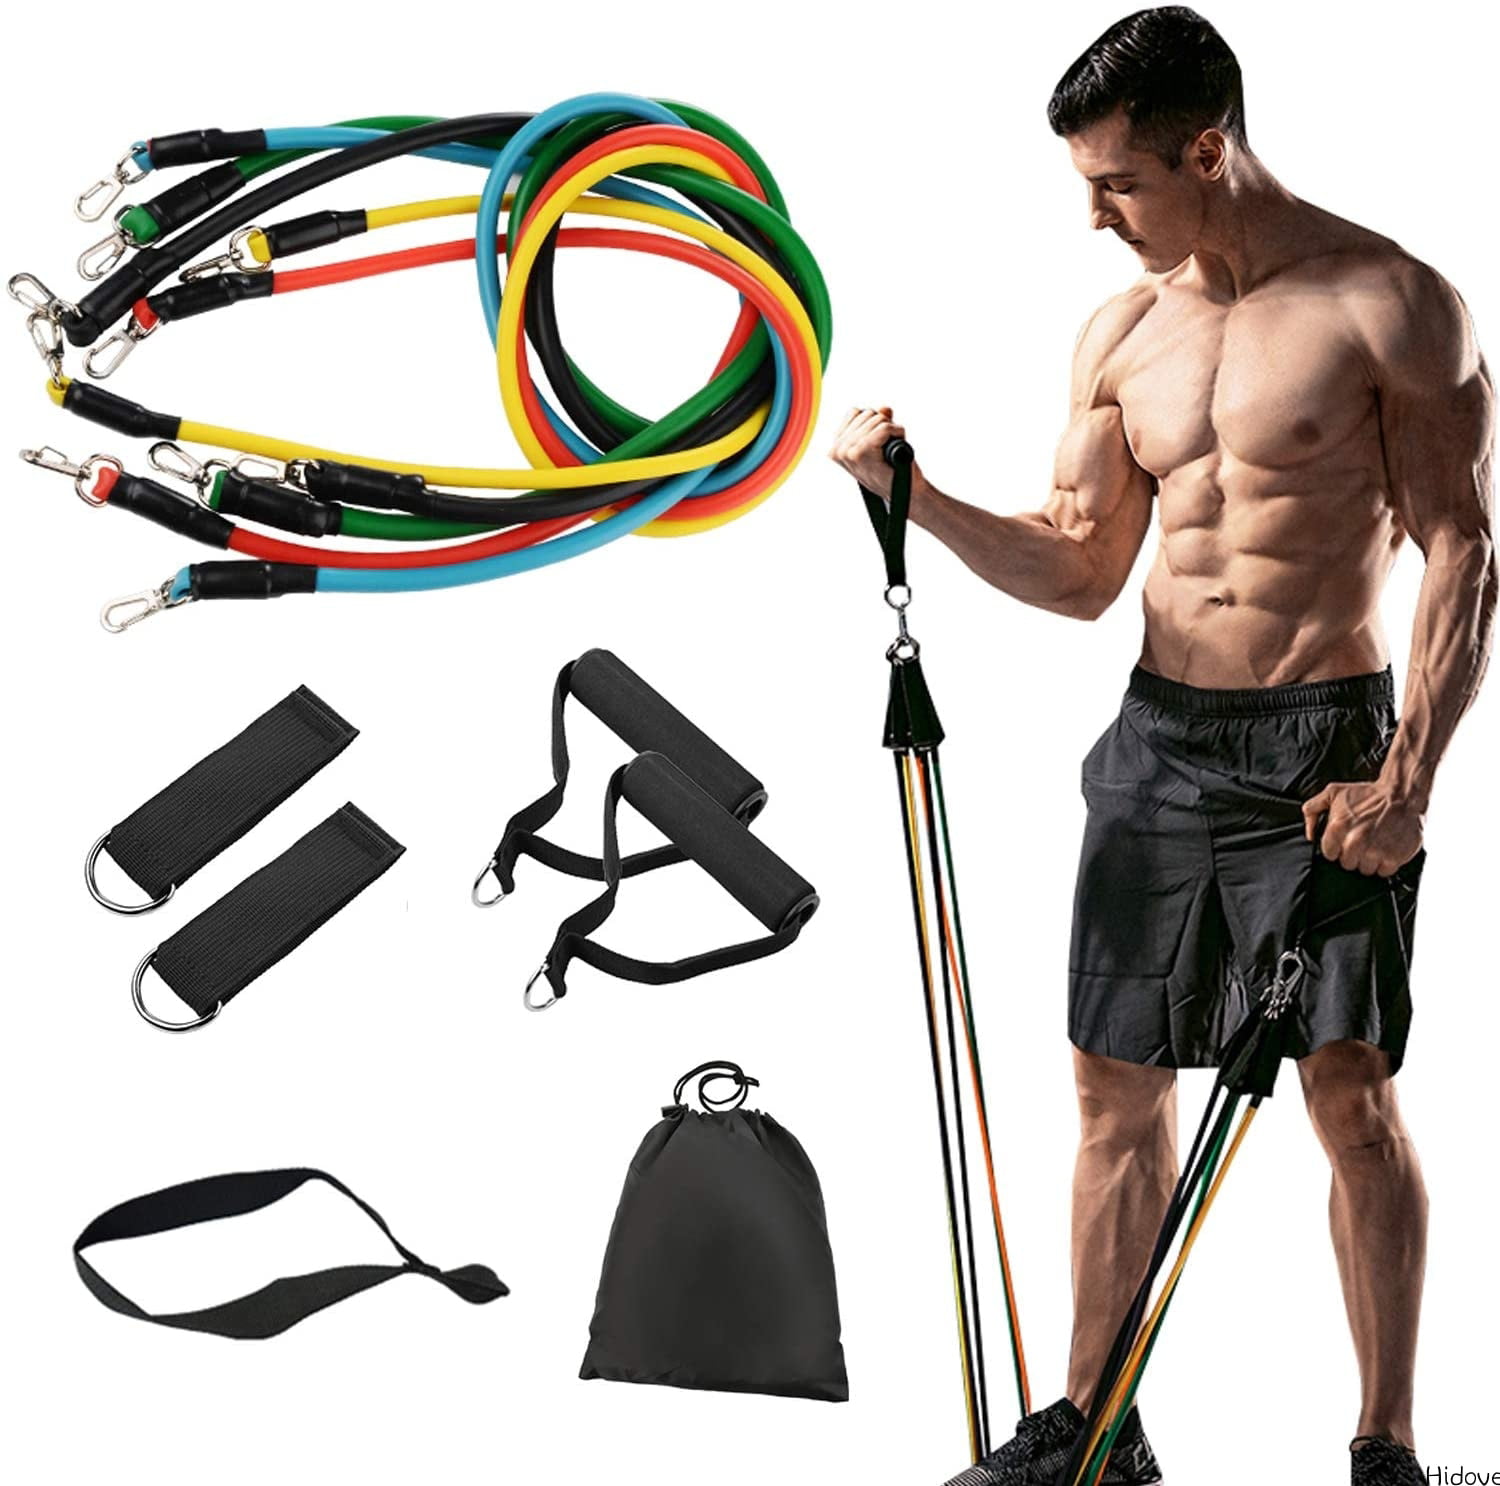 Suspension Trainer Kit Bodyweight Fitness Mobility Workout Training Straps Pro 3 